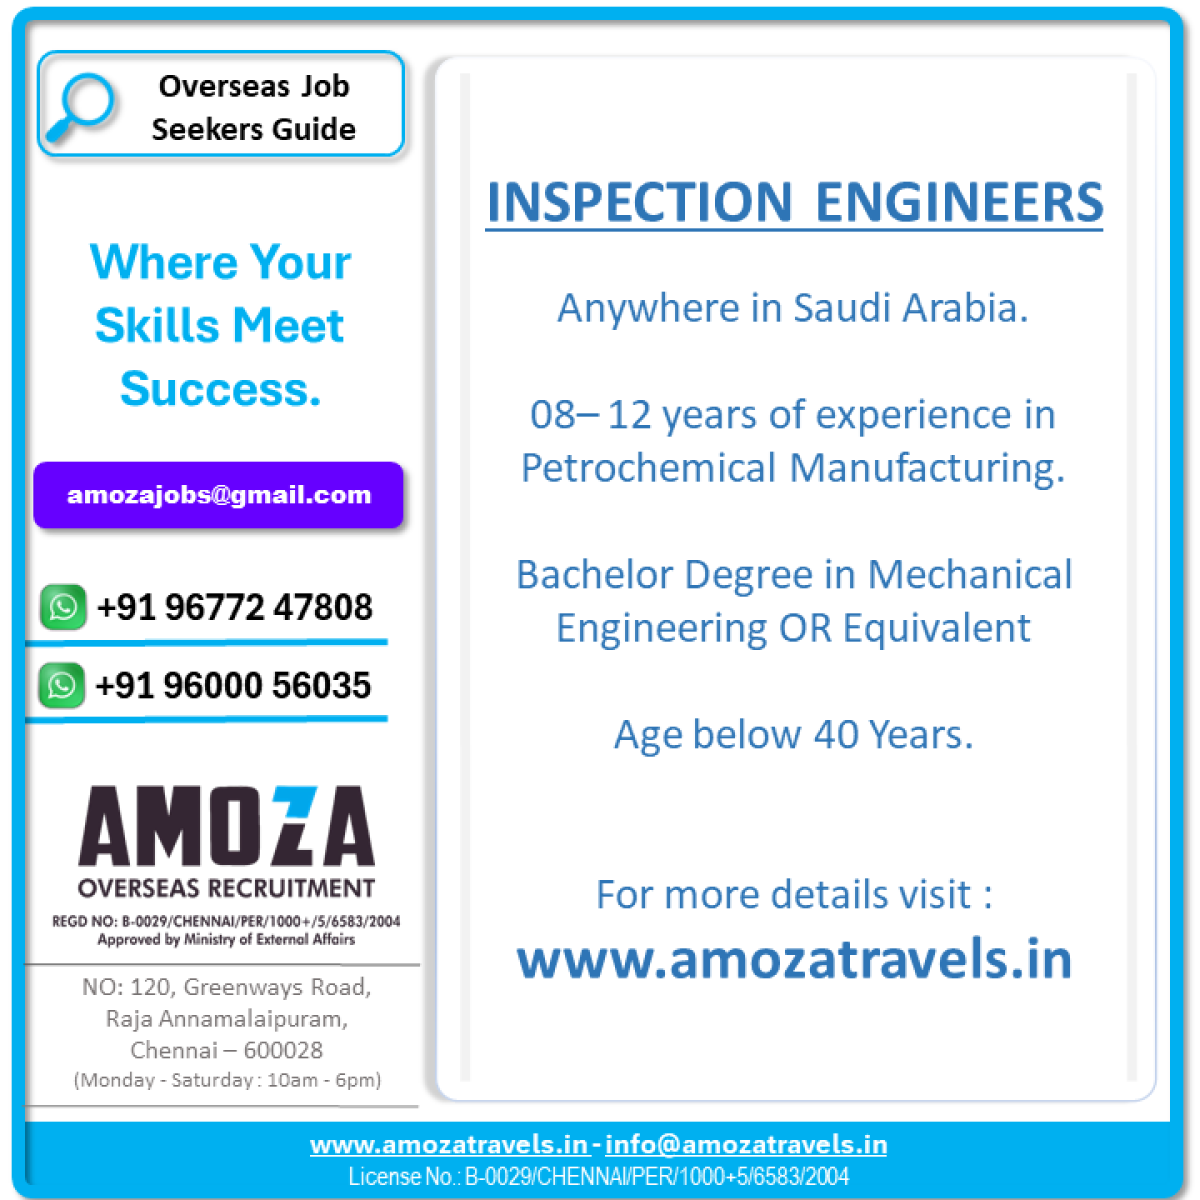 INSPECTION ENGINEERS